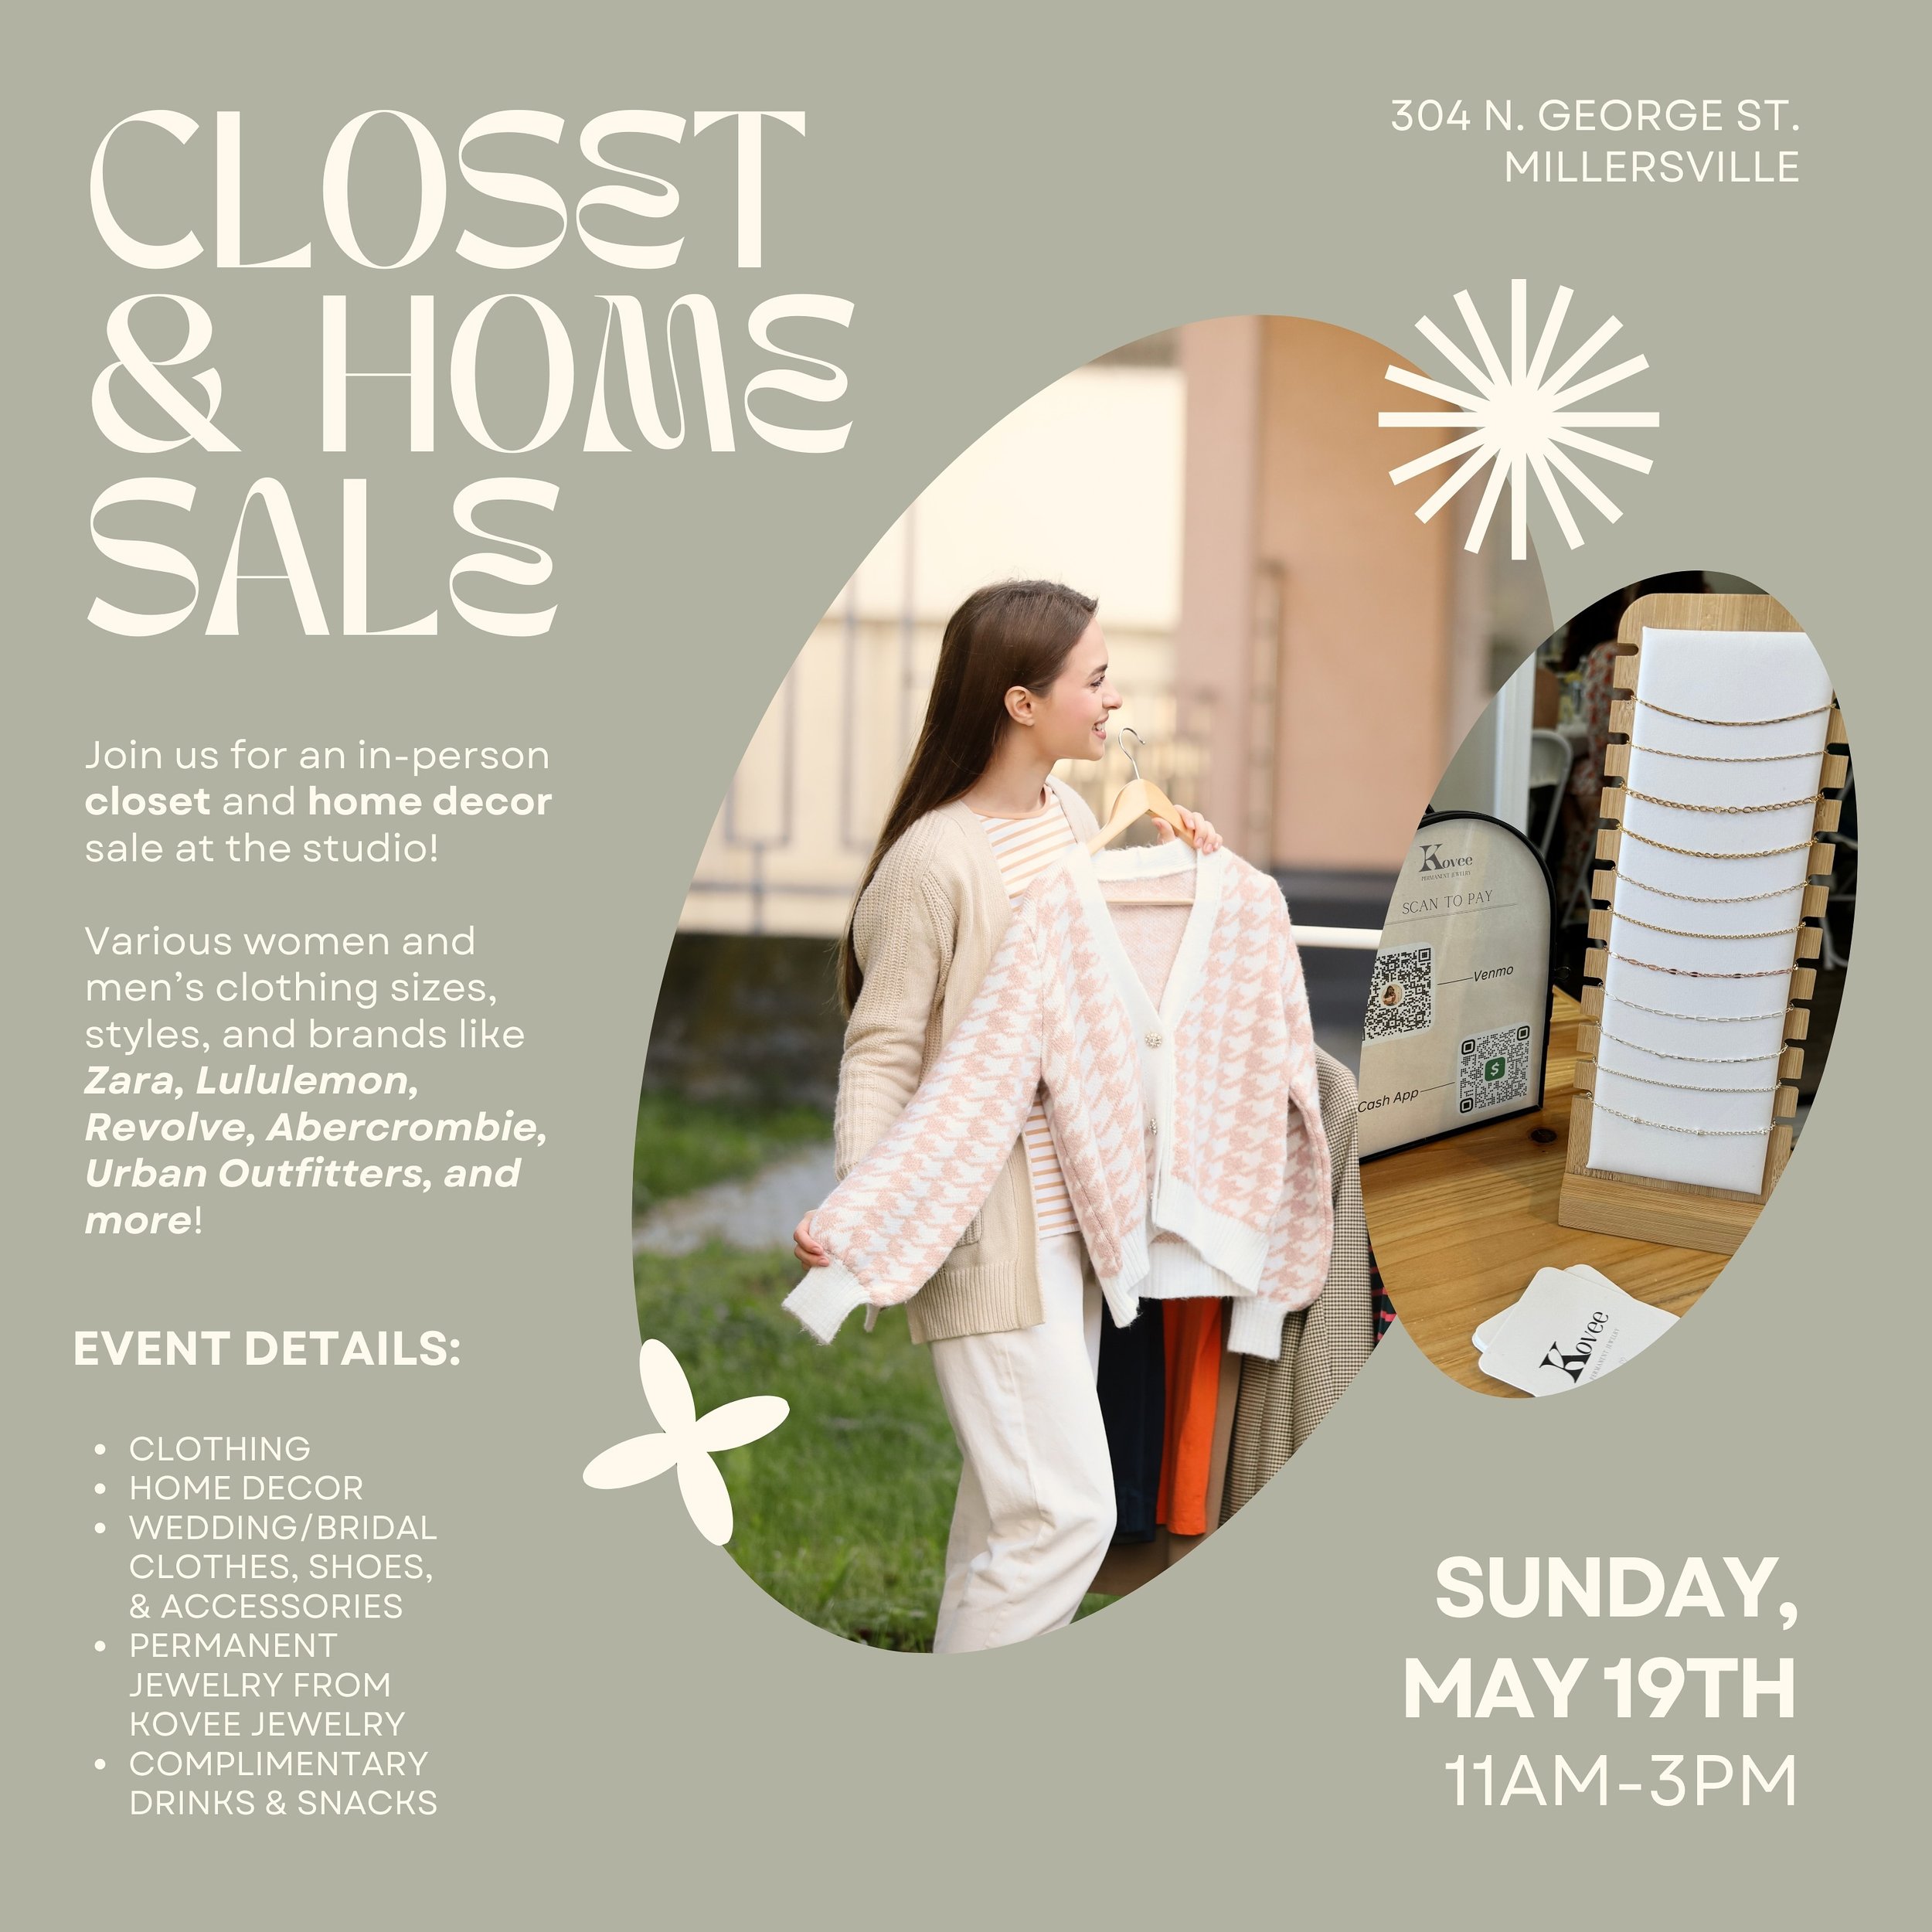 ✨ EVENT ANNOUNCEMENT ✨ 

Yet another fun event planned for May! Mark your calendars for Sunday, May 19th for an in-person Closet &amp; Home Decor Sale at Haven from 11am-3pm🛍️🏠🥂☁️ 

Looking for second-hand name brand clothes, accessories and home 